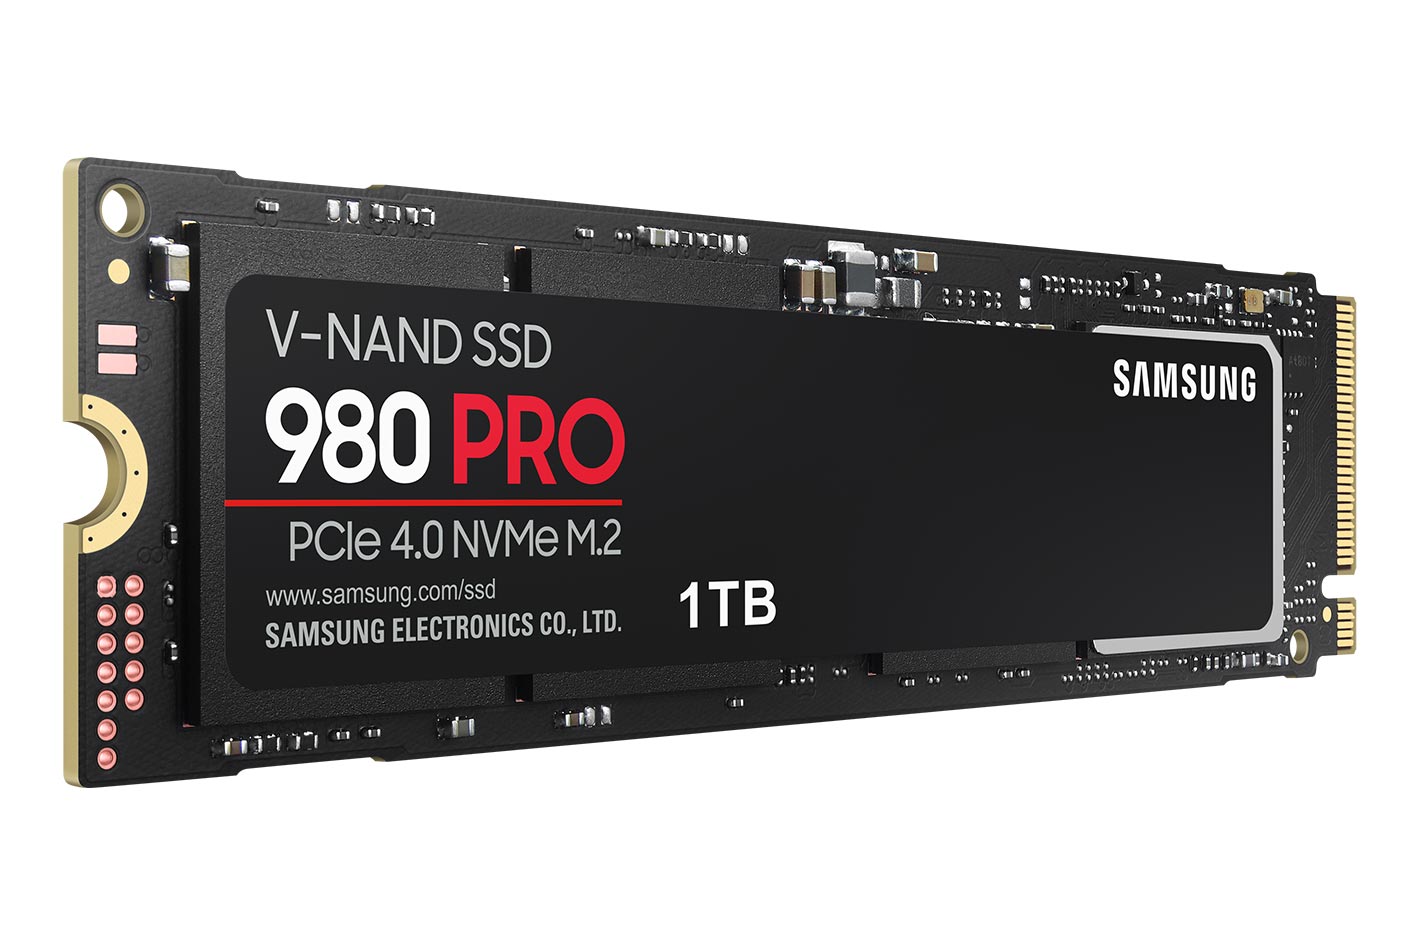 Samsung 980 PRO SSD: first consumer PCIe 4.0 NVMe